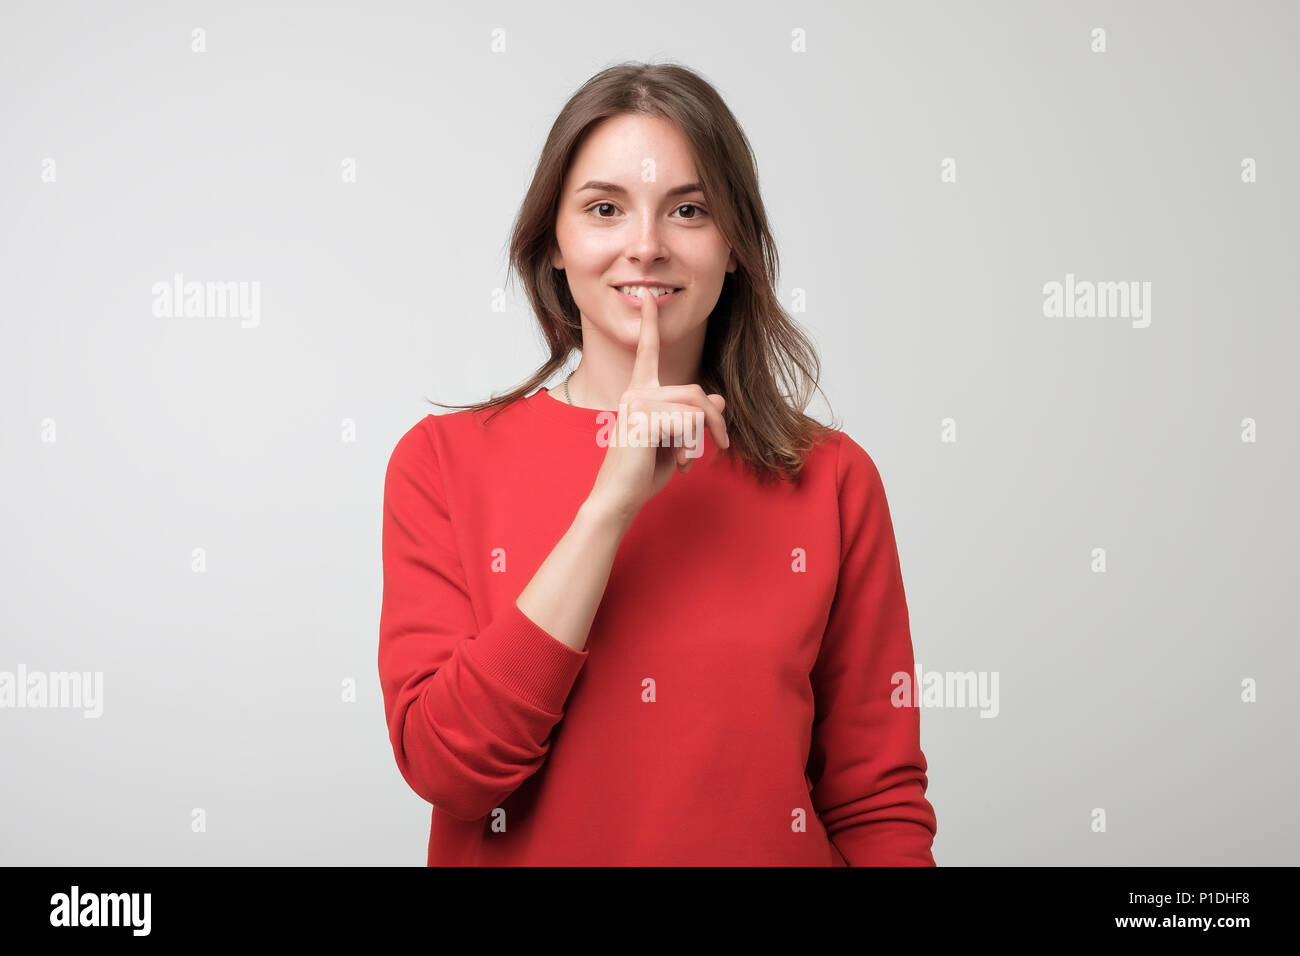 Beautiful european woman in red pulover showing silence sign Stock Photo